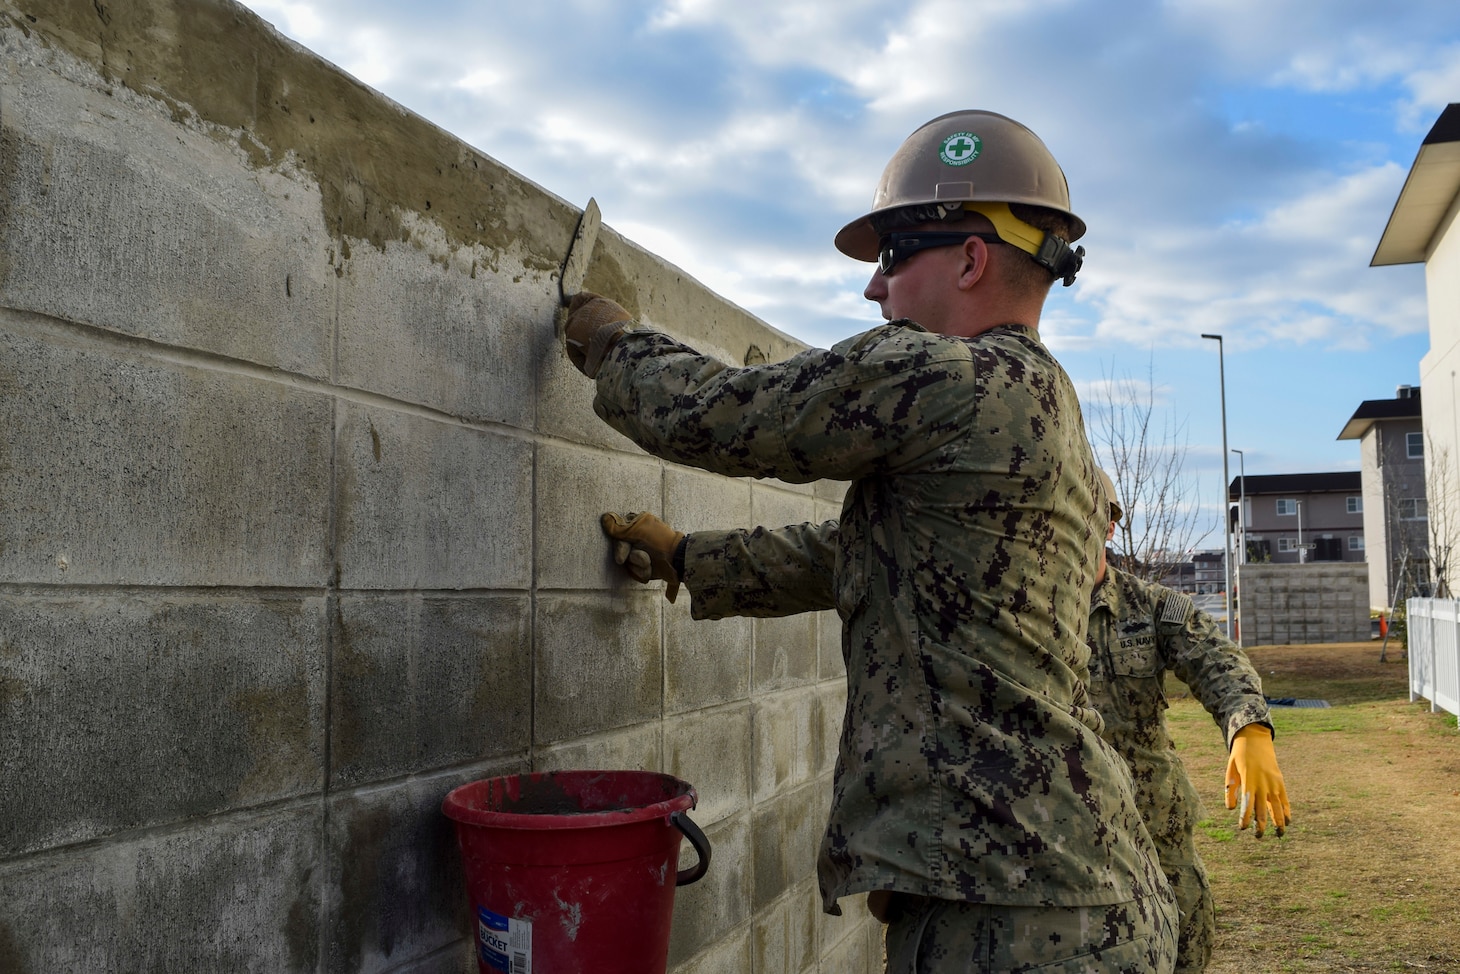 IWAKUNI, Japan (Jan. 8, 2020) Steelworker 3rd Class William Shutt, from Montpelier, Virginia, deployed with Naval Mobile Construction Battalion (NMCB) 5’s Detail Iwakuni, cleans cement blocks at the environmental enclosure project prior to painting. NMCB-5 is deployed across the Indo-Pacific region conducting high-quality construction to support U.S. and partner nations to strengthen partnerships, deter aggression, and enable expeditionary logistics and naval power projection.